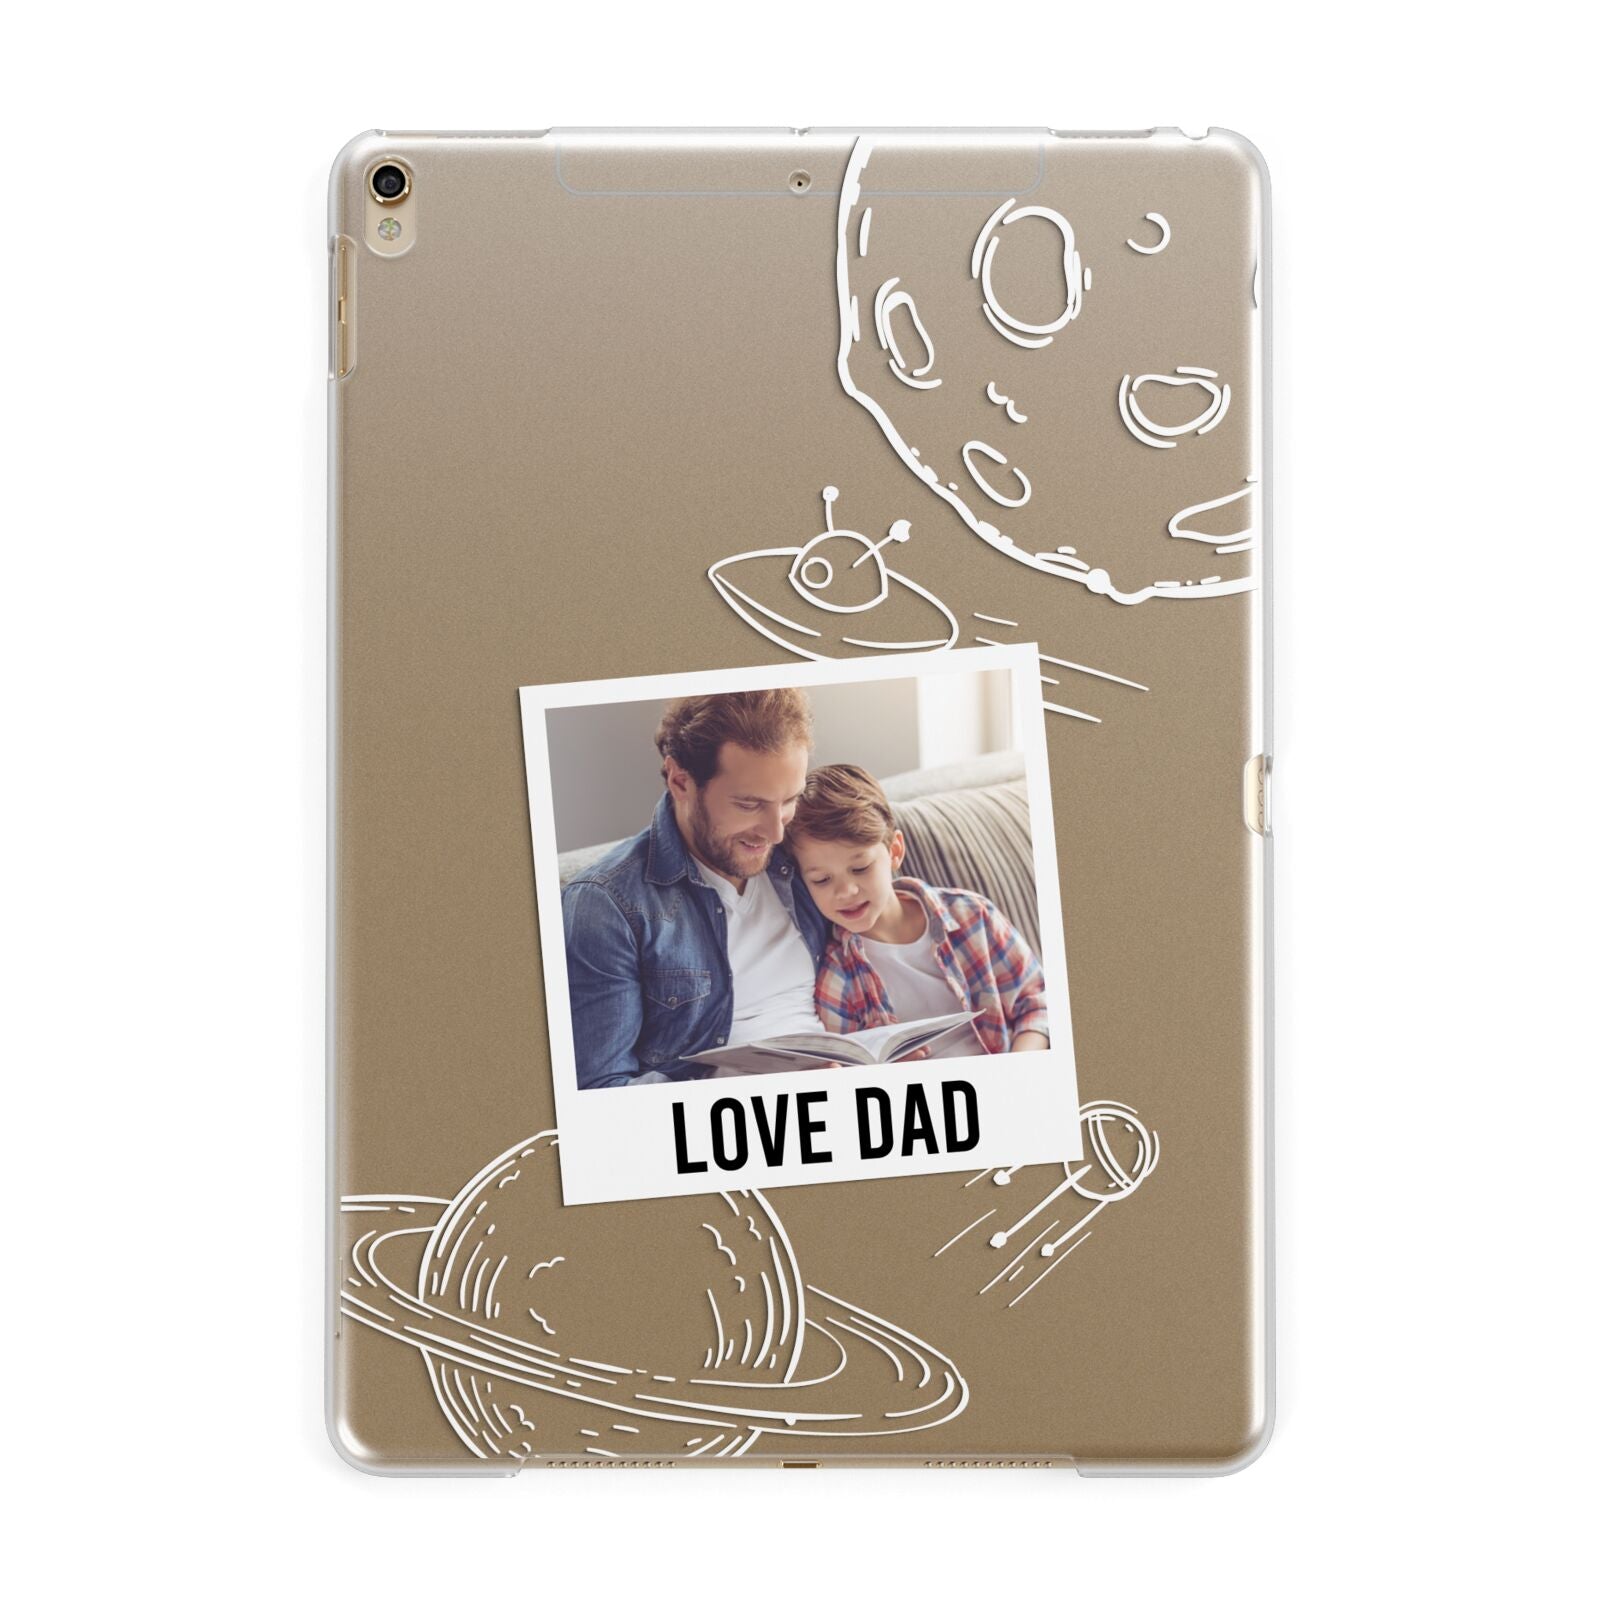 Personalised From Dad Photo Apple iPad Gold Case